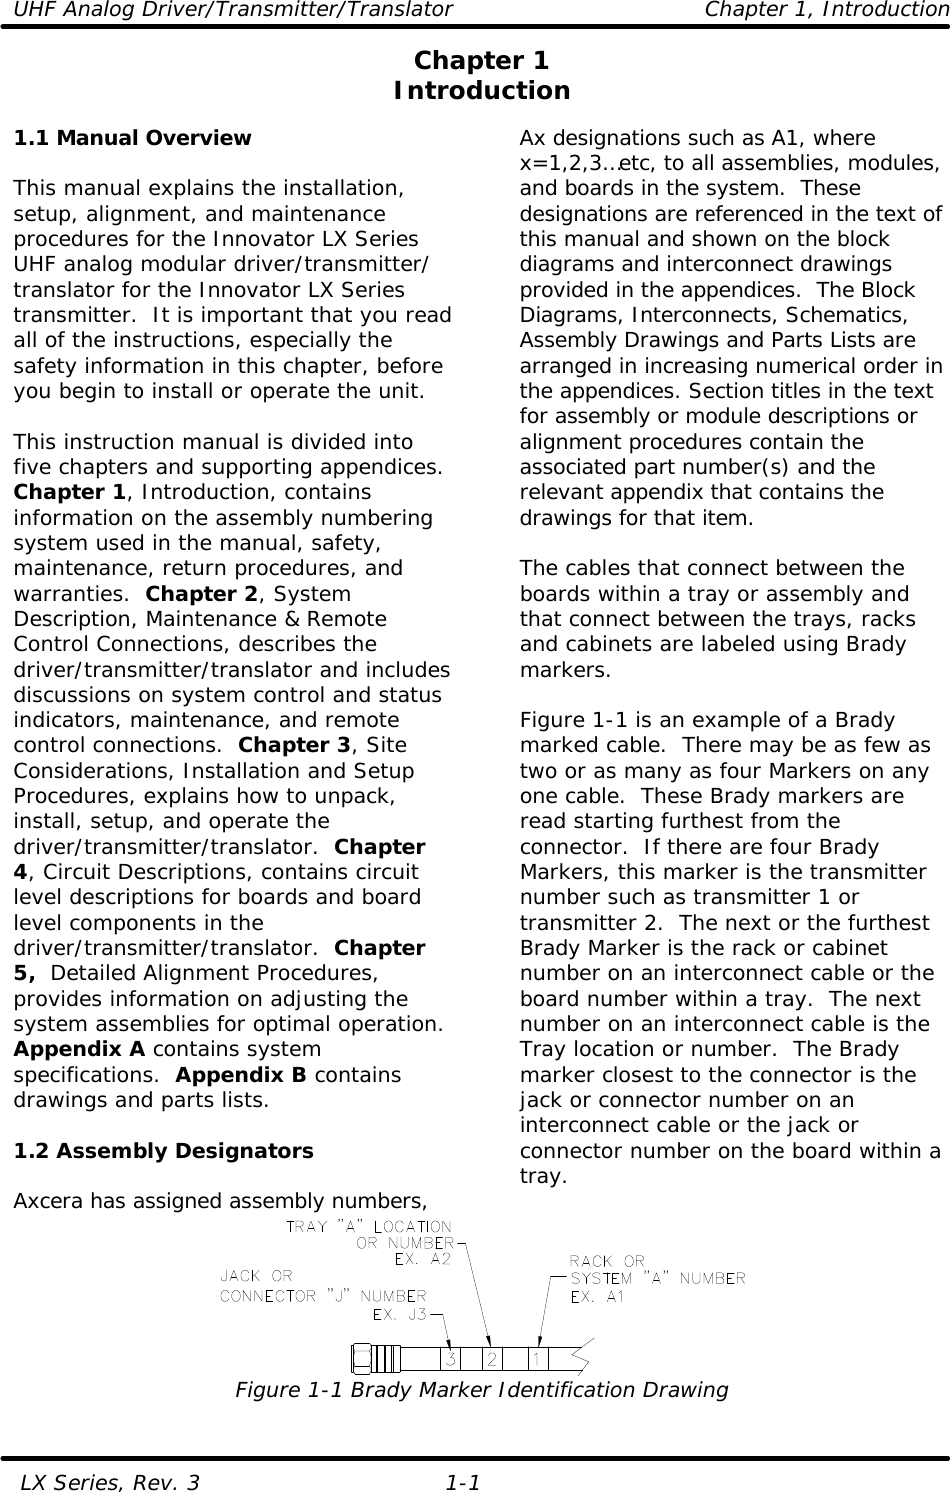 UHF Analog Driver/Transmitter/Translator Chapter 1, Introduction   LX Series, Rev. 3 1-1 Chapter 1 Introduction  1.1 Manual Overview  This manual explains the installation, setup, alignment, and maintenance procedures for the Innovator LX Series UHF analog modular driver/transmitter/ translator for the Innovator LX Series transmitter.  It is important that you read all of the instructions, especially the safety information in this chapter, before you begin to install or operate the unit.  This instruction manual is divided into five chapters and supporting appendices. Chapter 1, Introduction, contains information on the assembly numbering system used in the manual, safety, maintenance, return procedures, and warranties.  Chapter 2, System Description, Maintenance &amp; Remote Control Connections, describes the driver/transmitter/translator and includes discussions on system control and status indicators, maintenance, and remote control connections.  Chapter 3, Site Considerations, Installation and Setup Procedures, explains how to unpack, install, setup, and operate the driver/transmitter/translator.  Chapter 4, Circuit Descriptions, contains circuit level descriptions for boards and board level components in the driver/transmitter/translator.  Chapter 5,  Detailed Alignment Procedures, provides information on adjusting the system assemblies for optimal operation.  Appendix A contains system specifications.  Appendix B contains drawings and parts lists.  1.2 Assembly Designators  Axcera has assigned assembly numbers, Ax designations such as A1, where x=1,2,3…etc, to all assemblies, modules, and boards in the system.  These designations are referenced in the text of this manual and shown on the block diagrams and interconnect drawings provided in the appendices.  The Block Diagrams, Interconnects, Schematics, Assembly Drawings and Parts Lists are arranged in increasing numerical order in the appendices. Section titles in the text for assembly or module descriptions or alignment procedures contain the associated part number(s) and the relevant appendix that contains the drawings for that item.   The cables that connect between the boards within a tray or assembly and that connect between the trays, racks and cabinets are labeled using Brady markers.   Figure 1-1 is an example of a Brady marked cable.  There may be as few as two or as many as four Markers on any one cable.  These Brady markers are read starting furthest from the connector.  If there are four Brady Markers, this marker is the transmitter number such as transmitter 1 or transmitter 2.  The next or the furthest Brady Marker is the rack or cabinet number on an interconnect cable or the board number within a tray.  The next number on an interconnect cable is the Tray location or number.  The Brady marker closest to the connector is the jack or connector number on an interconnect cable or the jack or connector number on the board within a tray.  Figure 1-1 Brady Marker Identification Drawing 